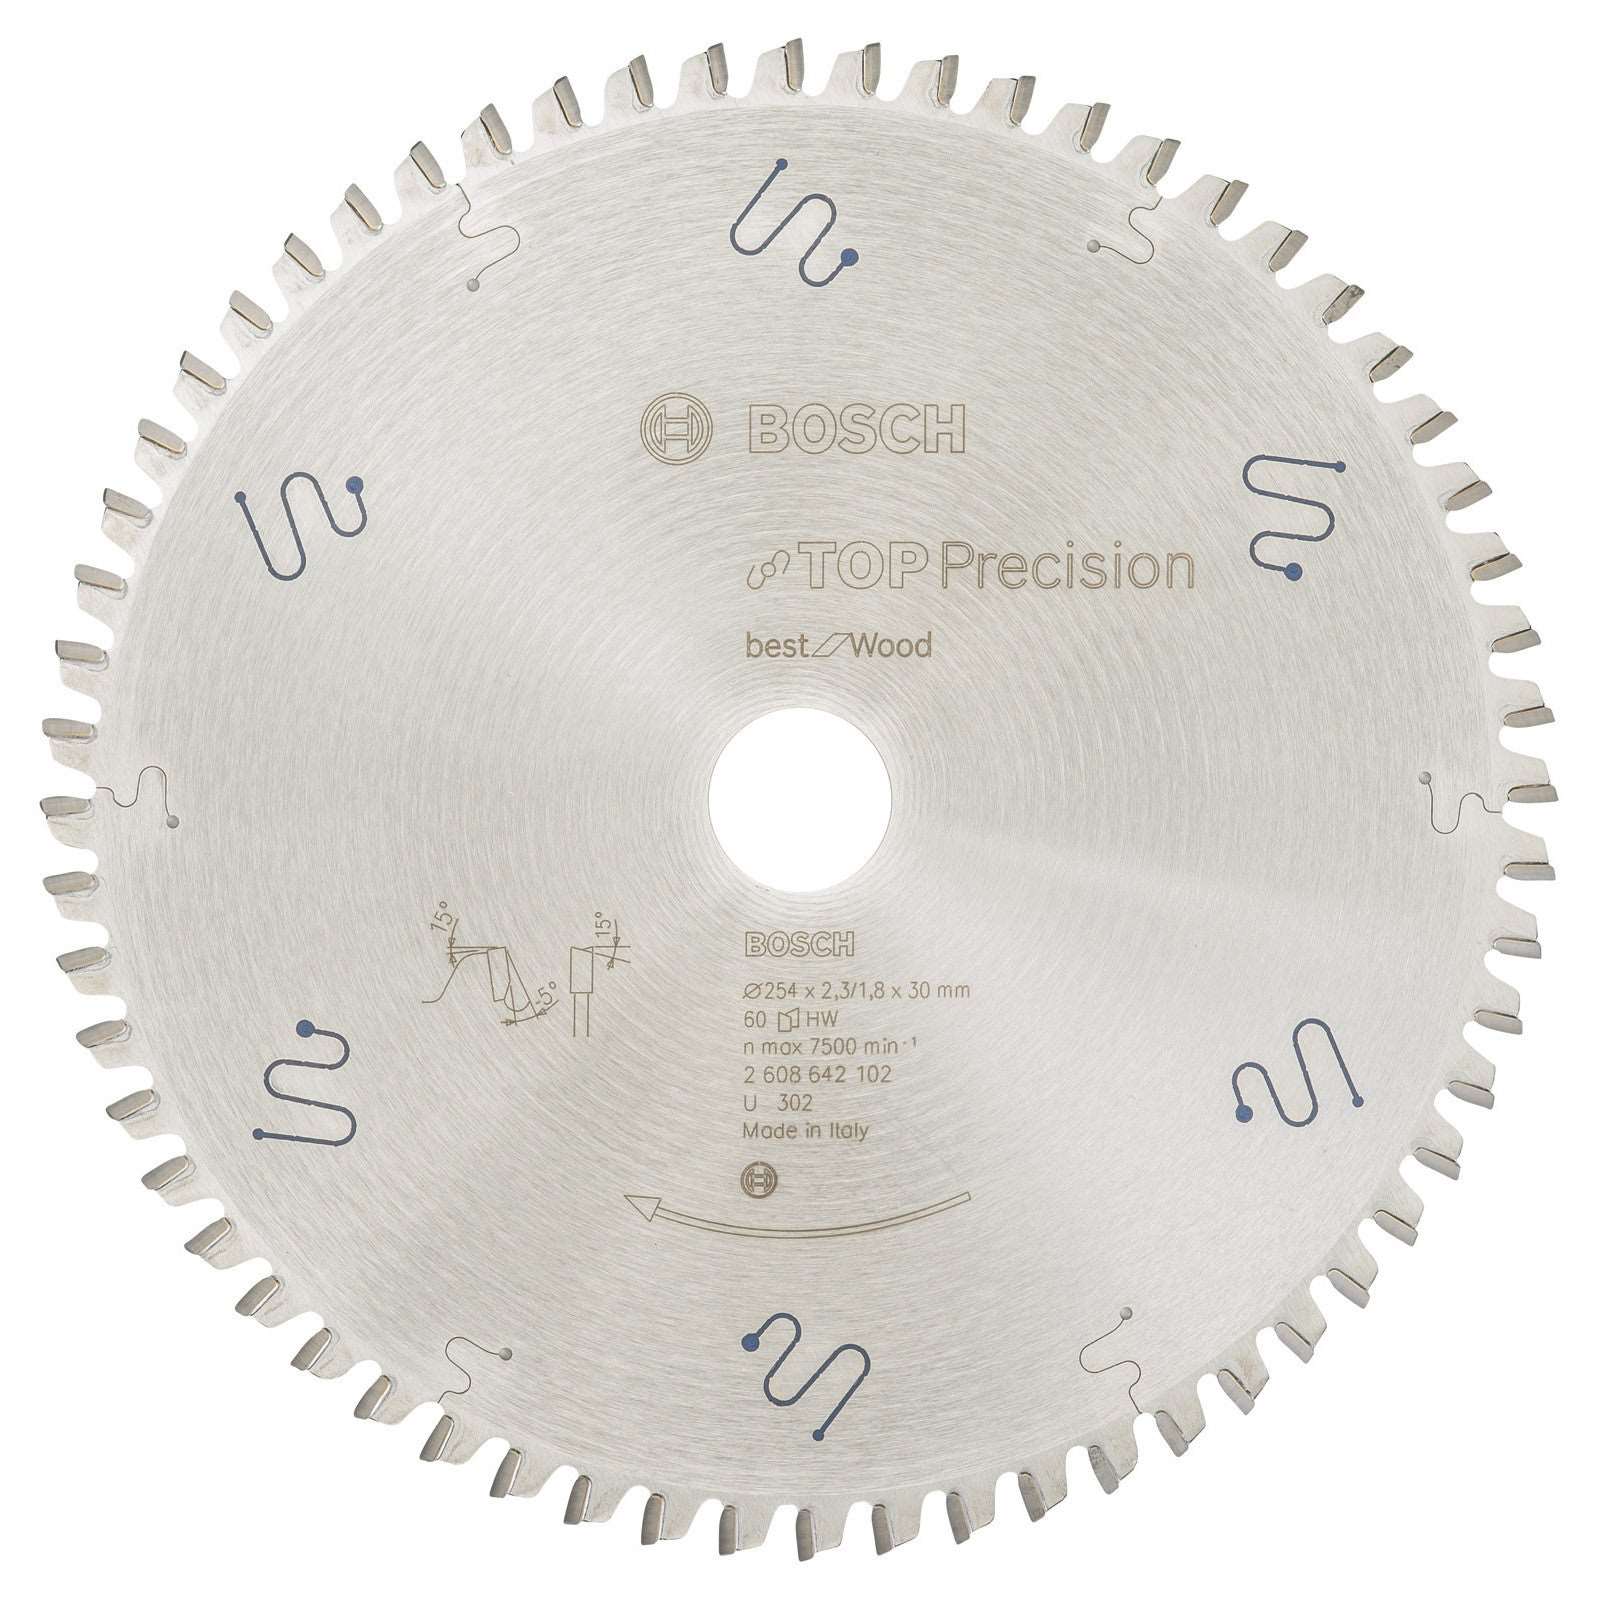 Bosch Circular Saw Blade Best for Wood 254 x 30 x 2.3 mm, 60 2608642102 Power Tool Services